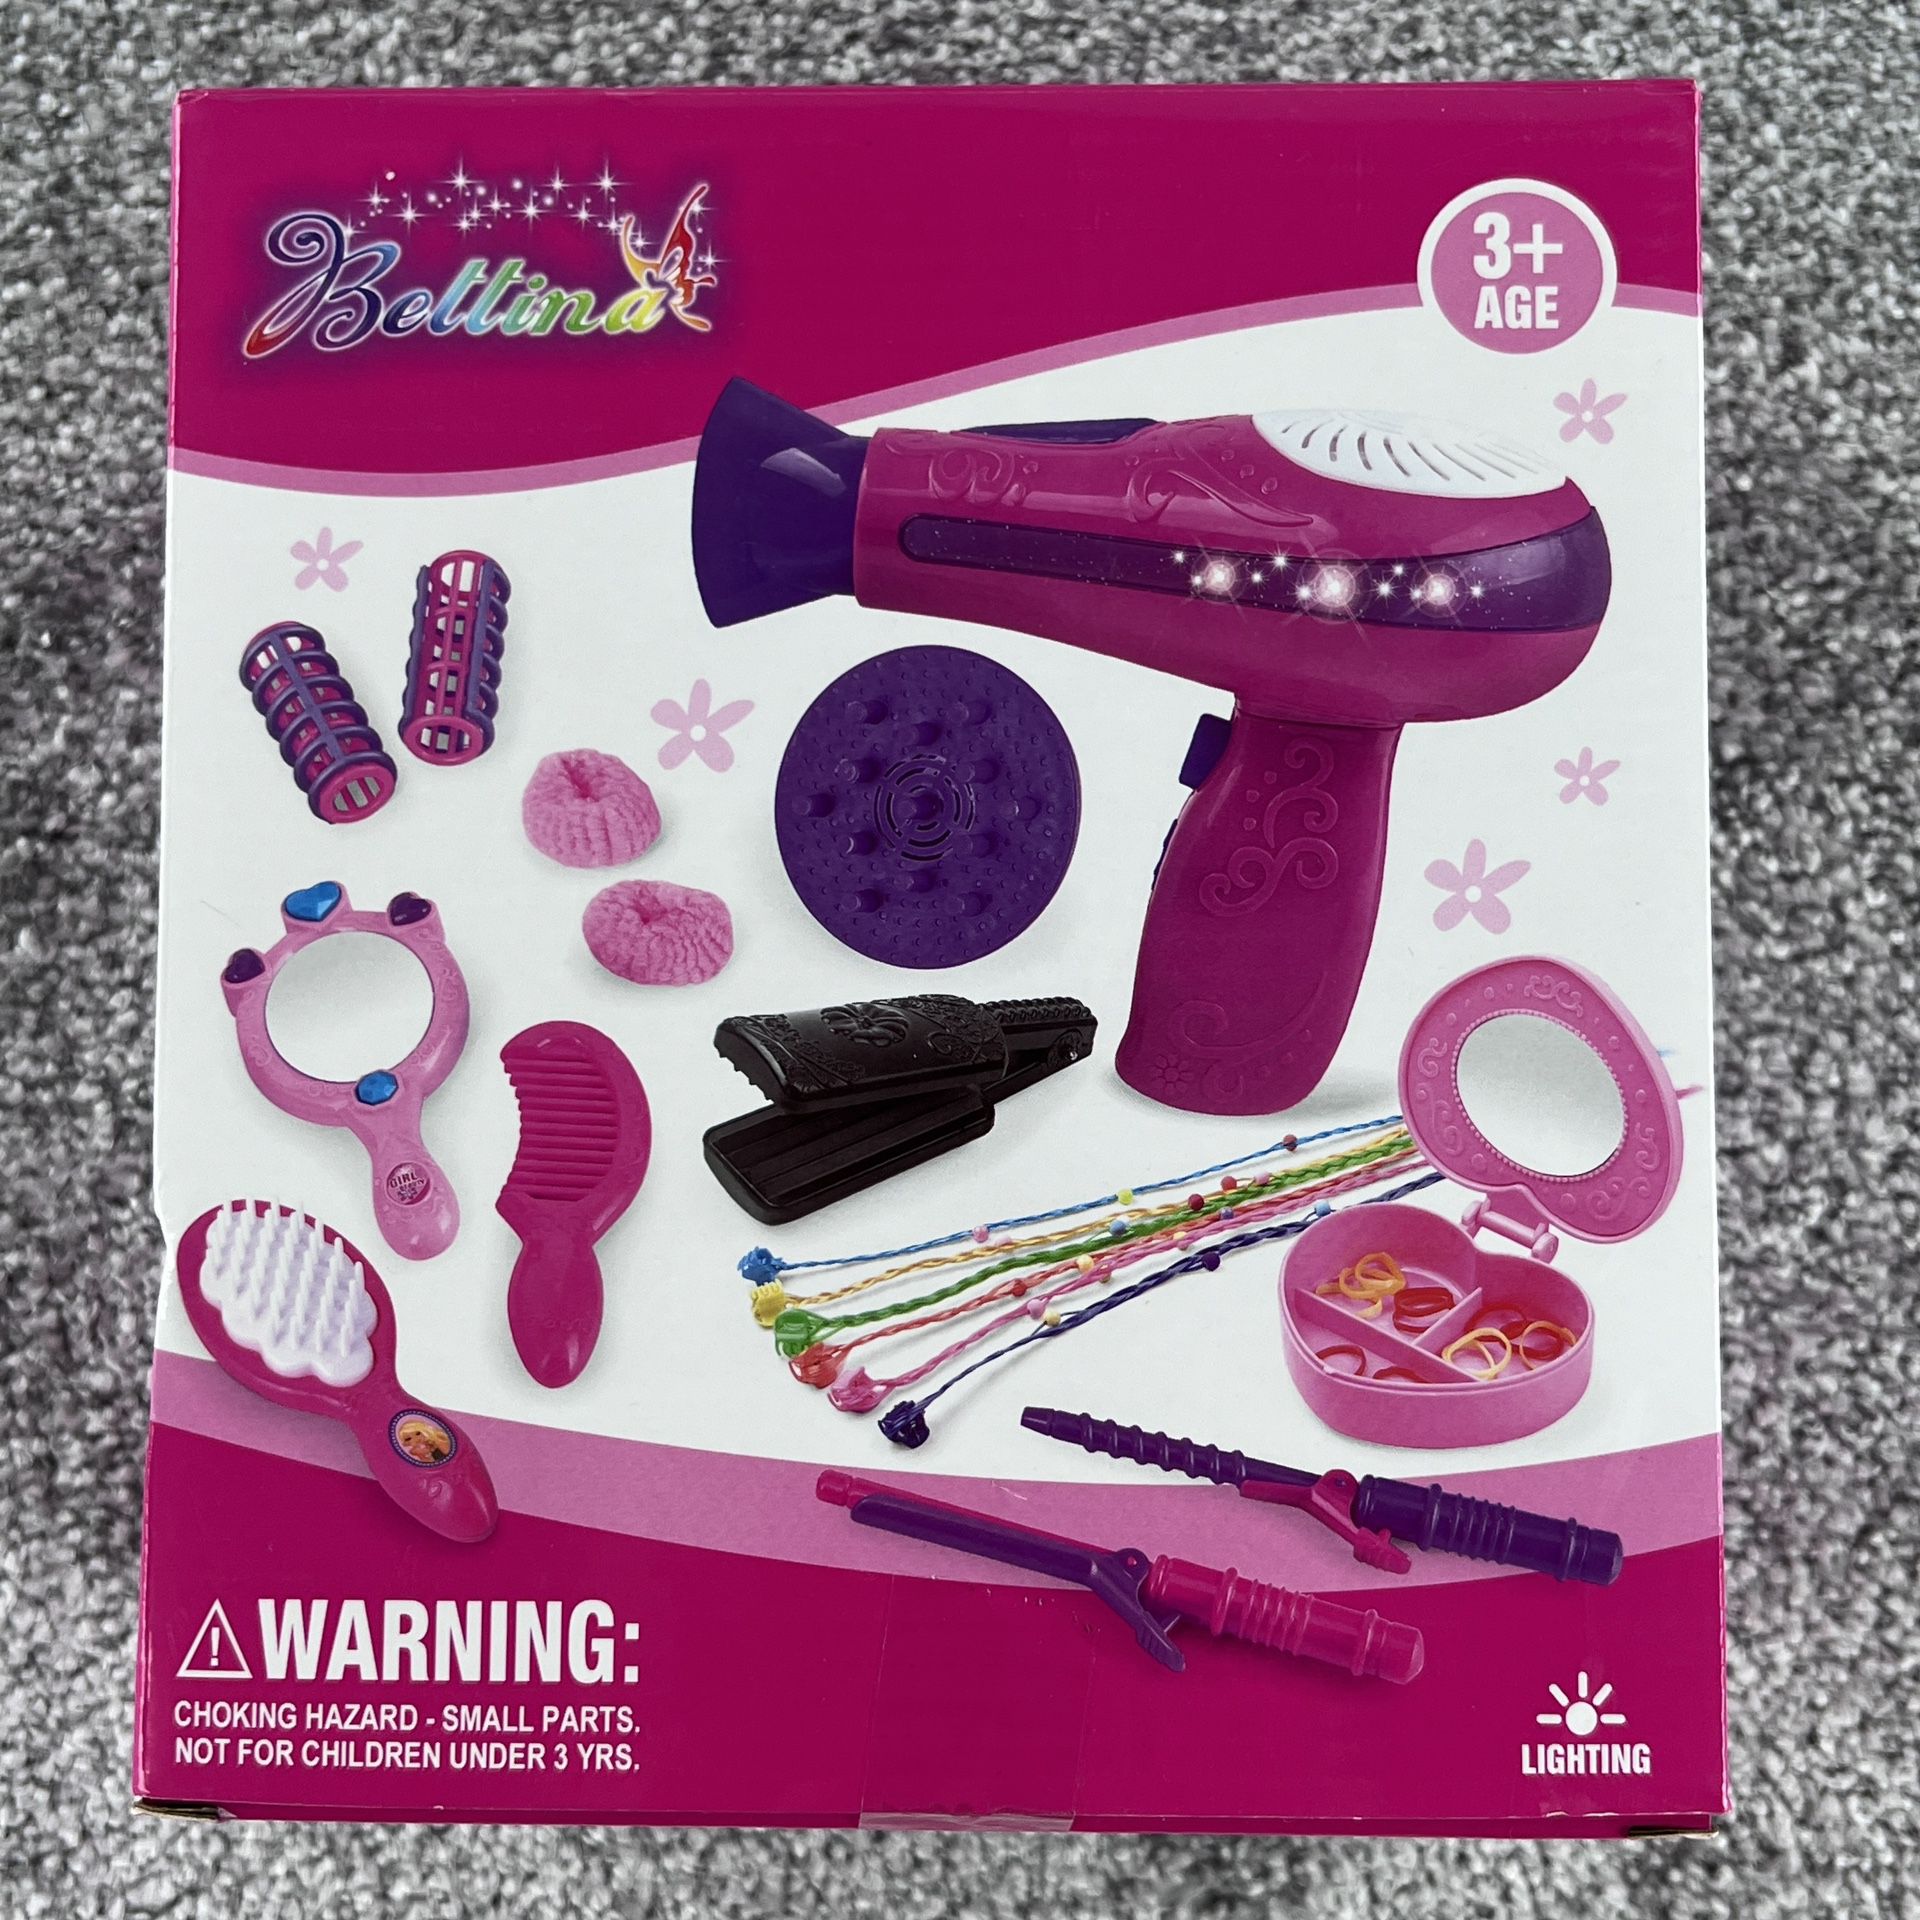 Bettina Girls Play Hair Dryer with Diffuser Multiple Attachments Included New! 